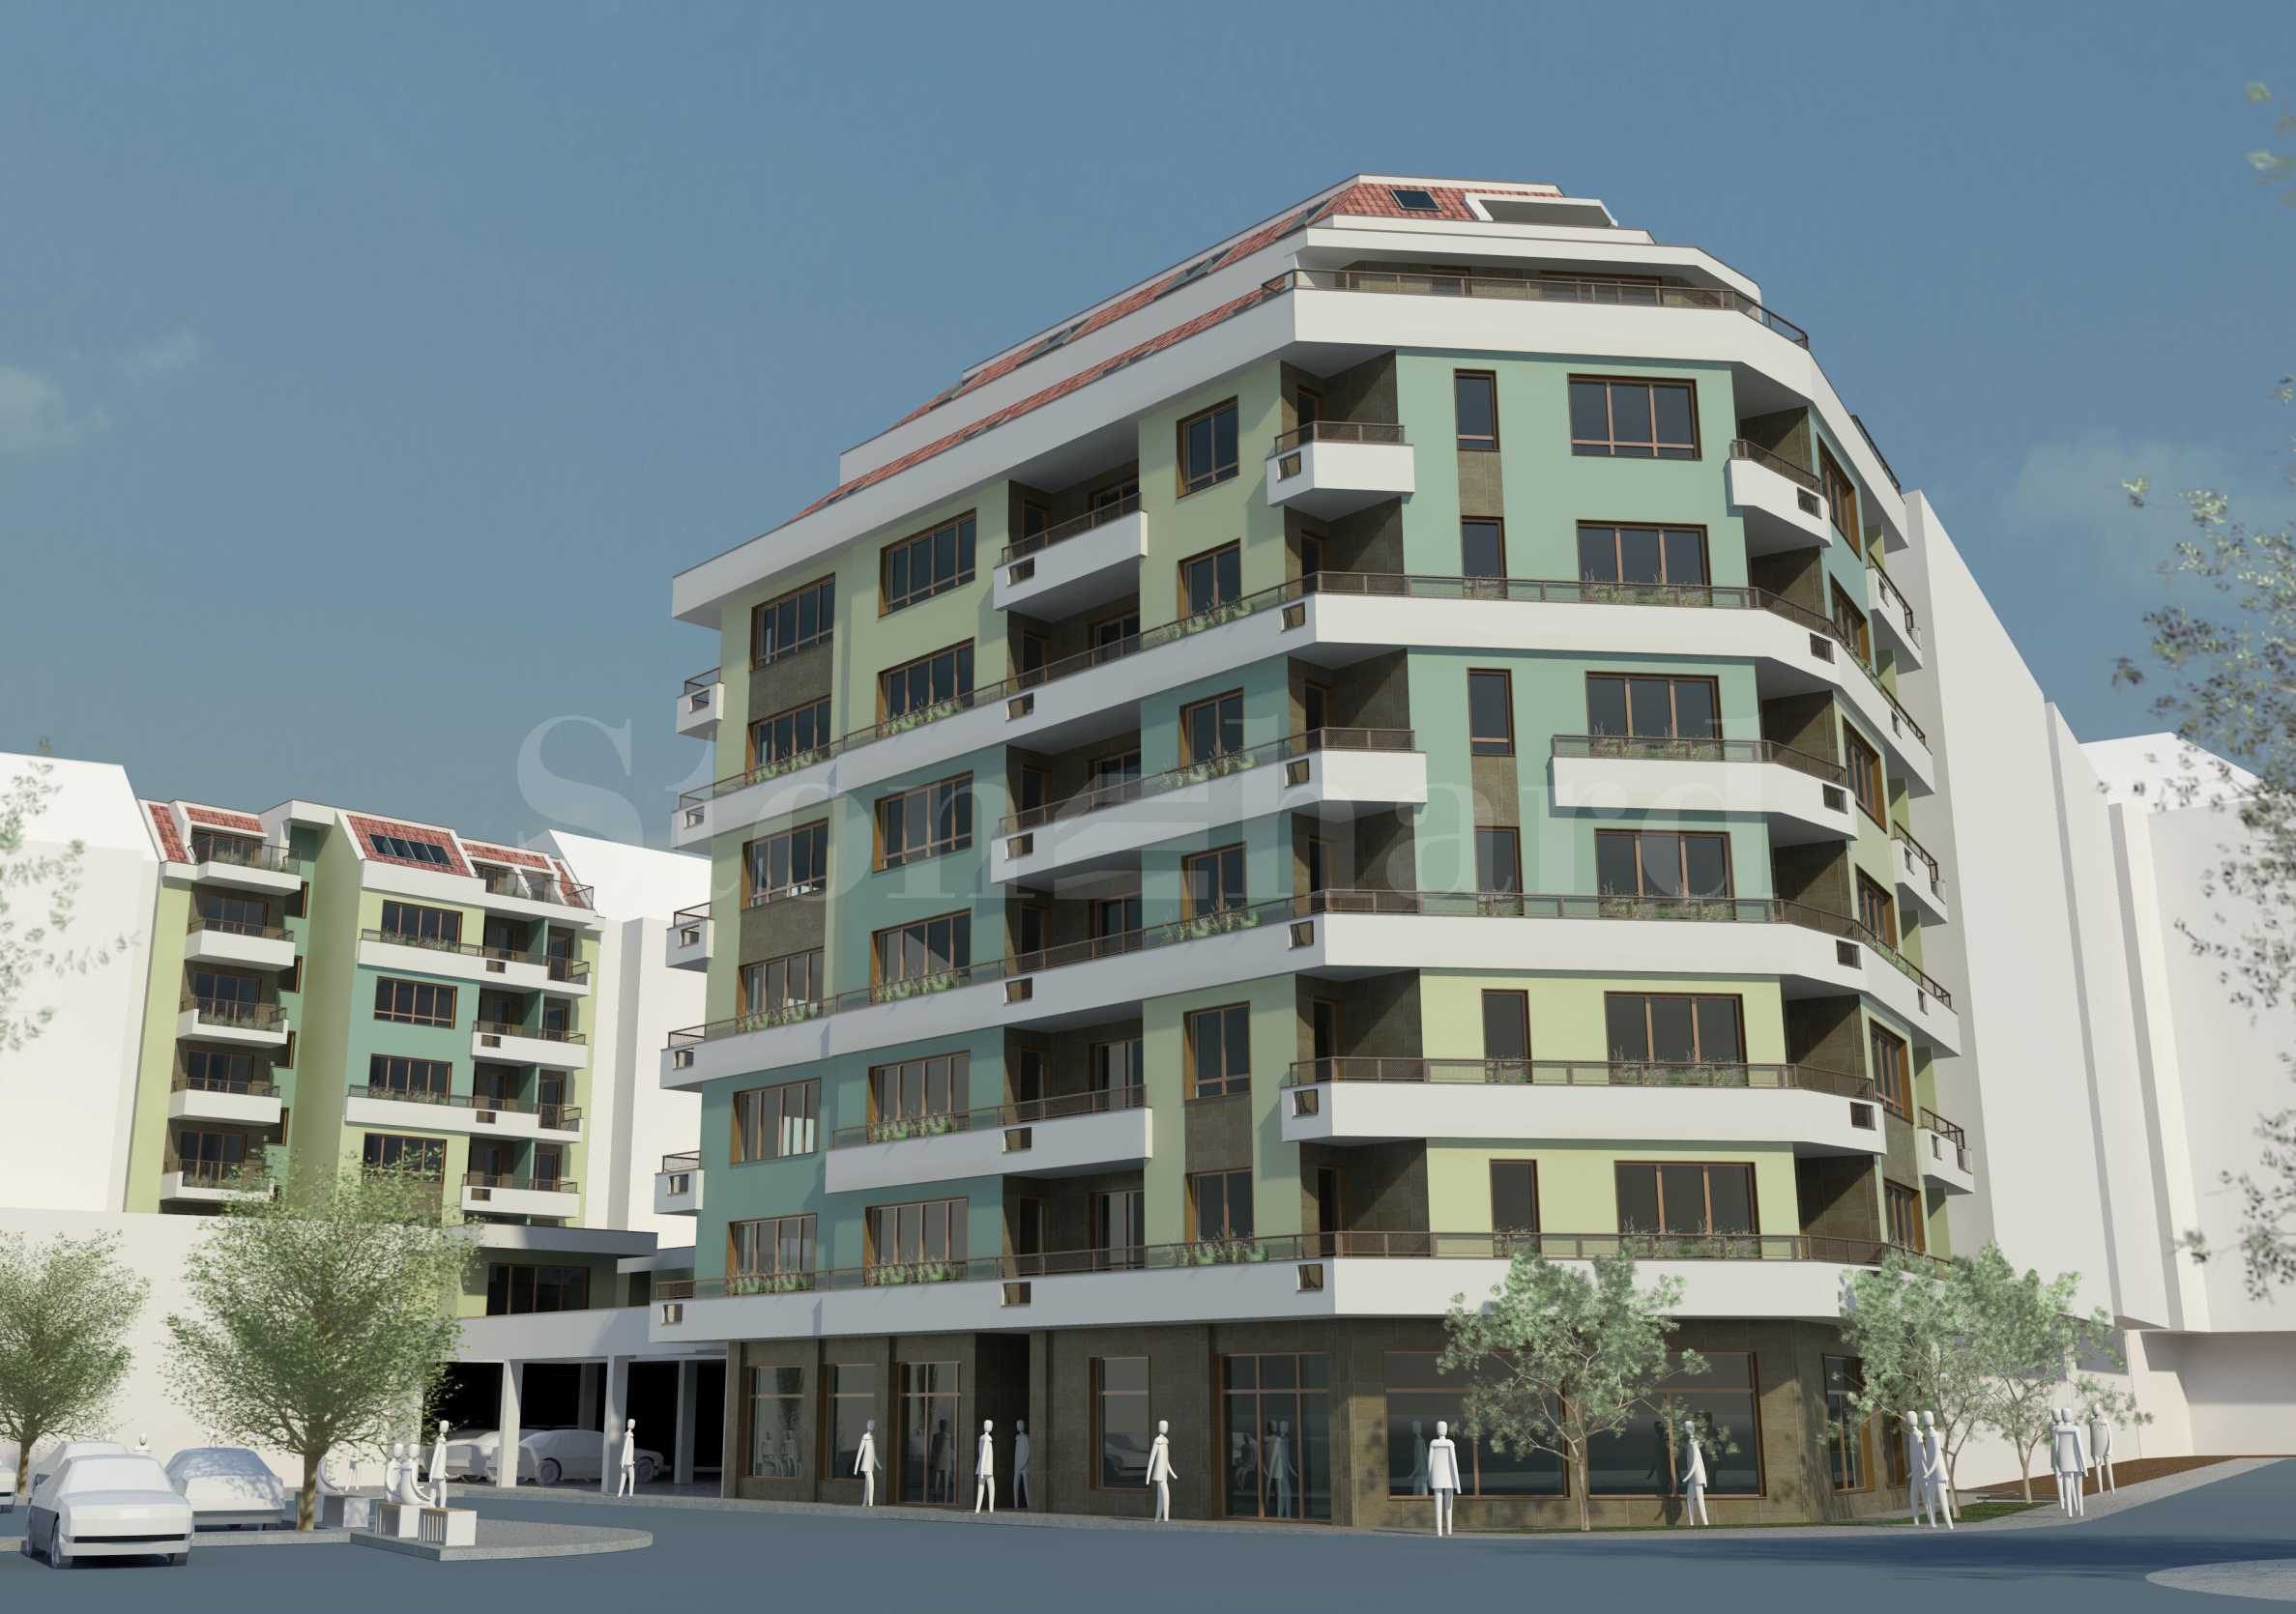 New residential building with shops and offices in Burgas, Slaveykov neighborhood1 - Stonehard